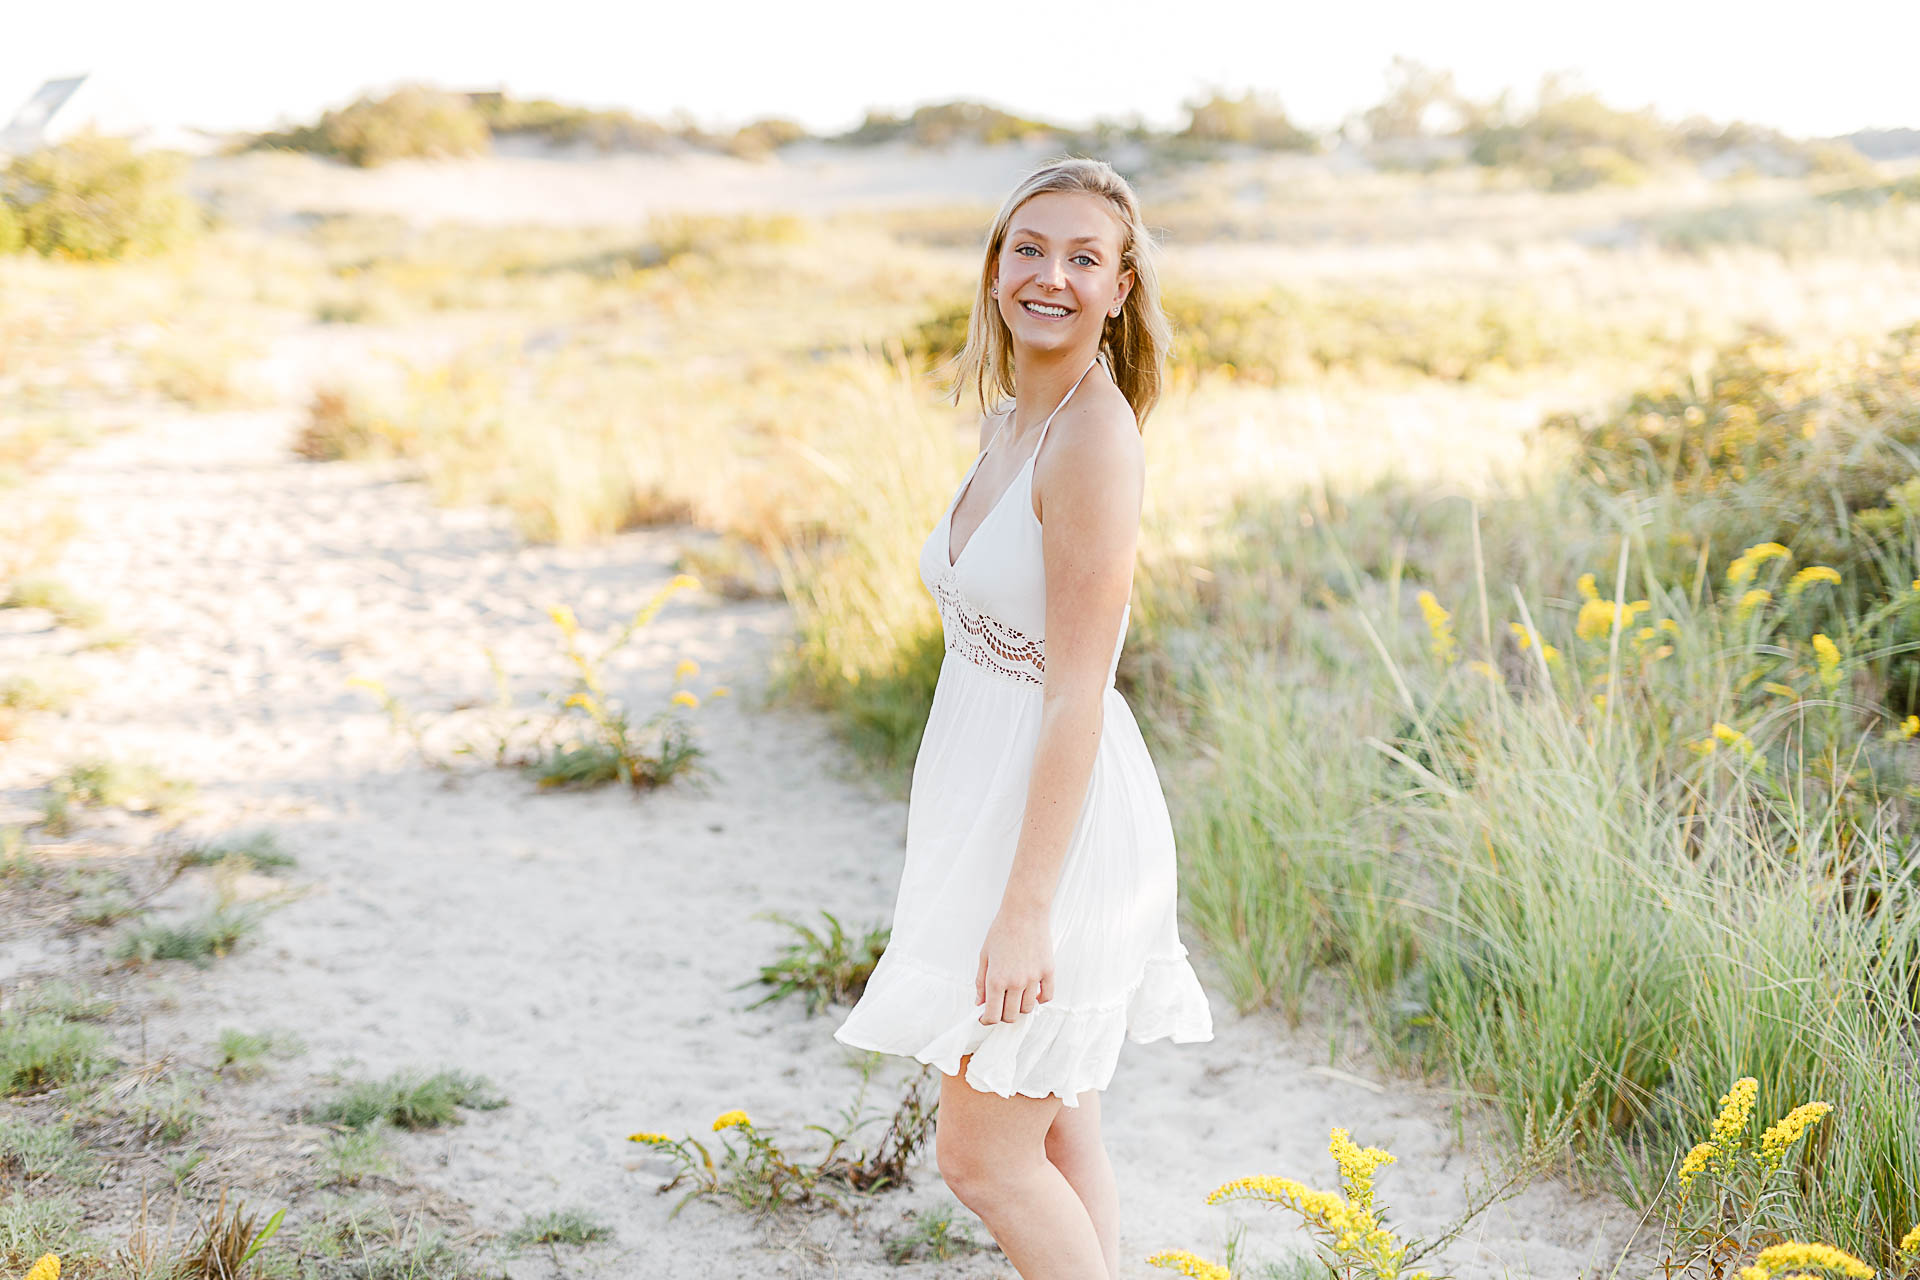 Photo by Christina Runnals Photography who specializes in luxe senior portraits | Girl standing in beach grass twirling a white dress